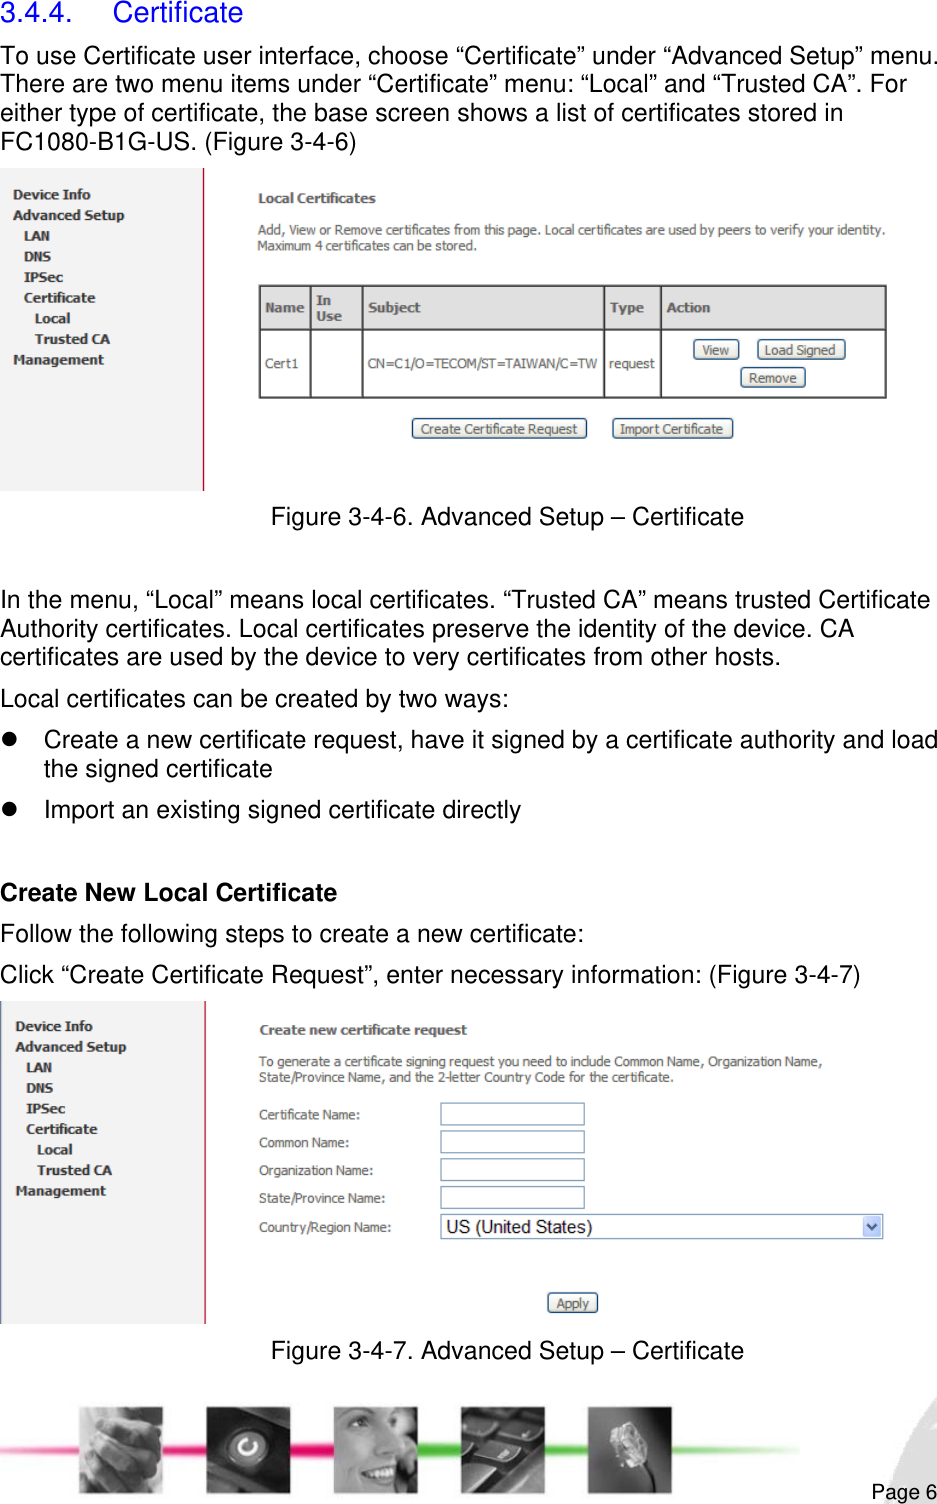                                                                                                                                                                                                       3.4.4. Certificate To use Certificate user interface, choose “Certificate” under “Advanced Setup” menu. There are two menu items under “Certificate” menu: “Local” and “Trusted CA”. For either type of certificate, the base screen shows a list of certificates stored in FC1080-B1G-US. (Figure 3-4-6)  Figure 3-4-6. Advanced Setup – Certificate  In the menu, “Local” means local certificates. “Trusted CA” means trusted Certificate Authority certificates. Local certificates preserve the identity of the device. CA certificates are used by the device to very certificates from other hosts. Local certificates can be created by two ways: z  Create a new certificate request, have it signed by a certificate authority and load the signed certificate z  Import an existing signed certificate directly  Create New Local Certificate  Follow the following steps to create a new certificate: Click “Create Certificate Request”, enter necessary information: (Figure 3-4-7)  Figure 3-4-7. Advanced Setup – Certificate  Page 6 